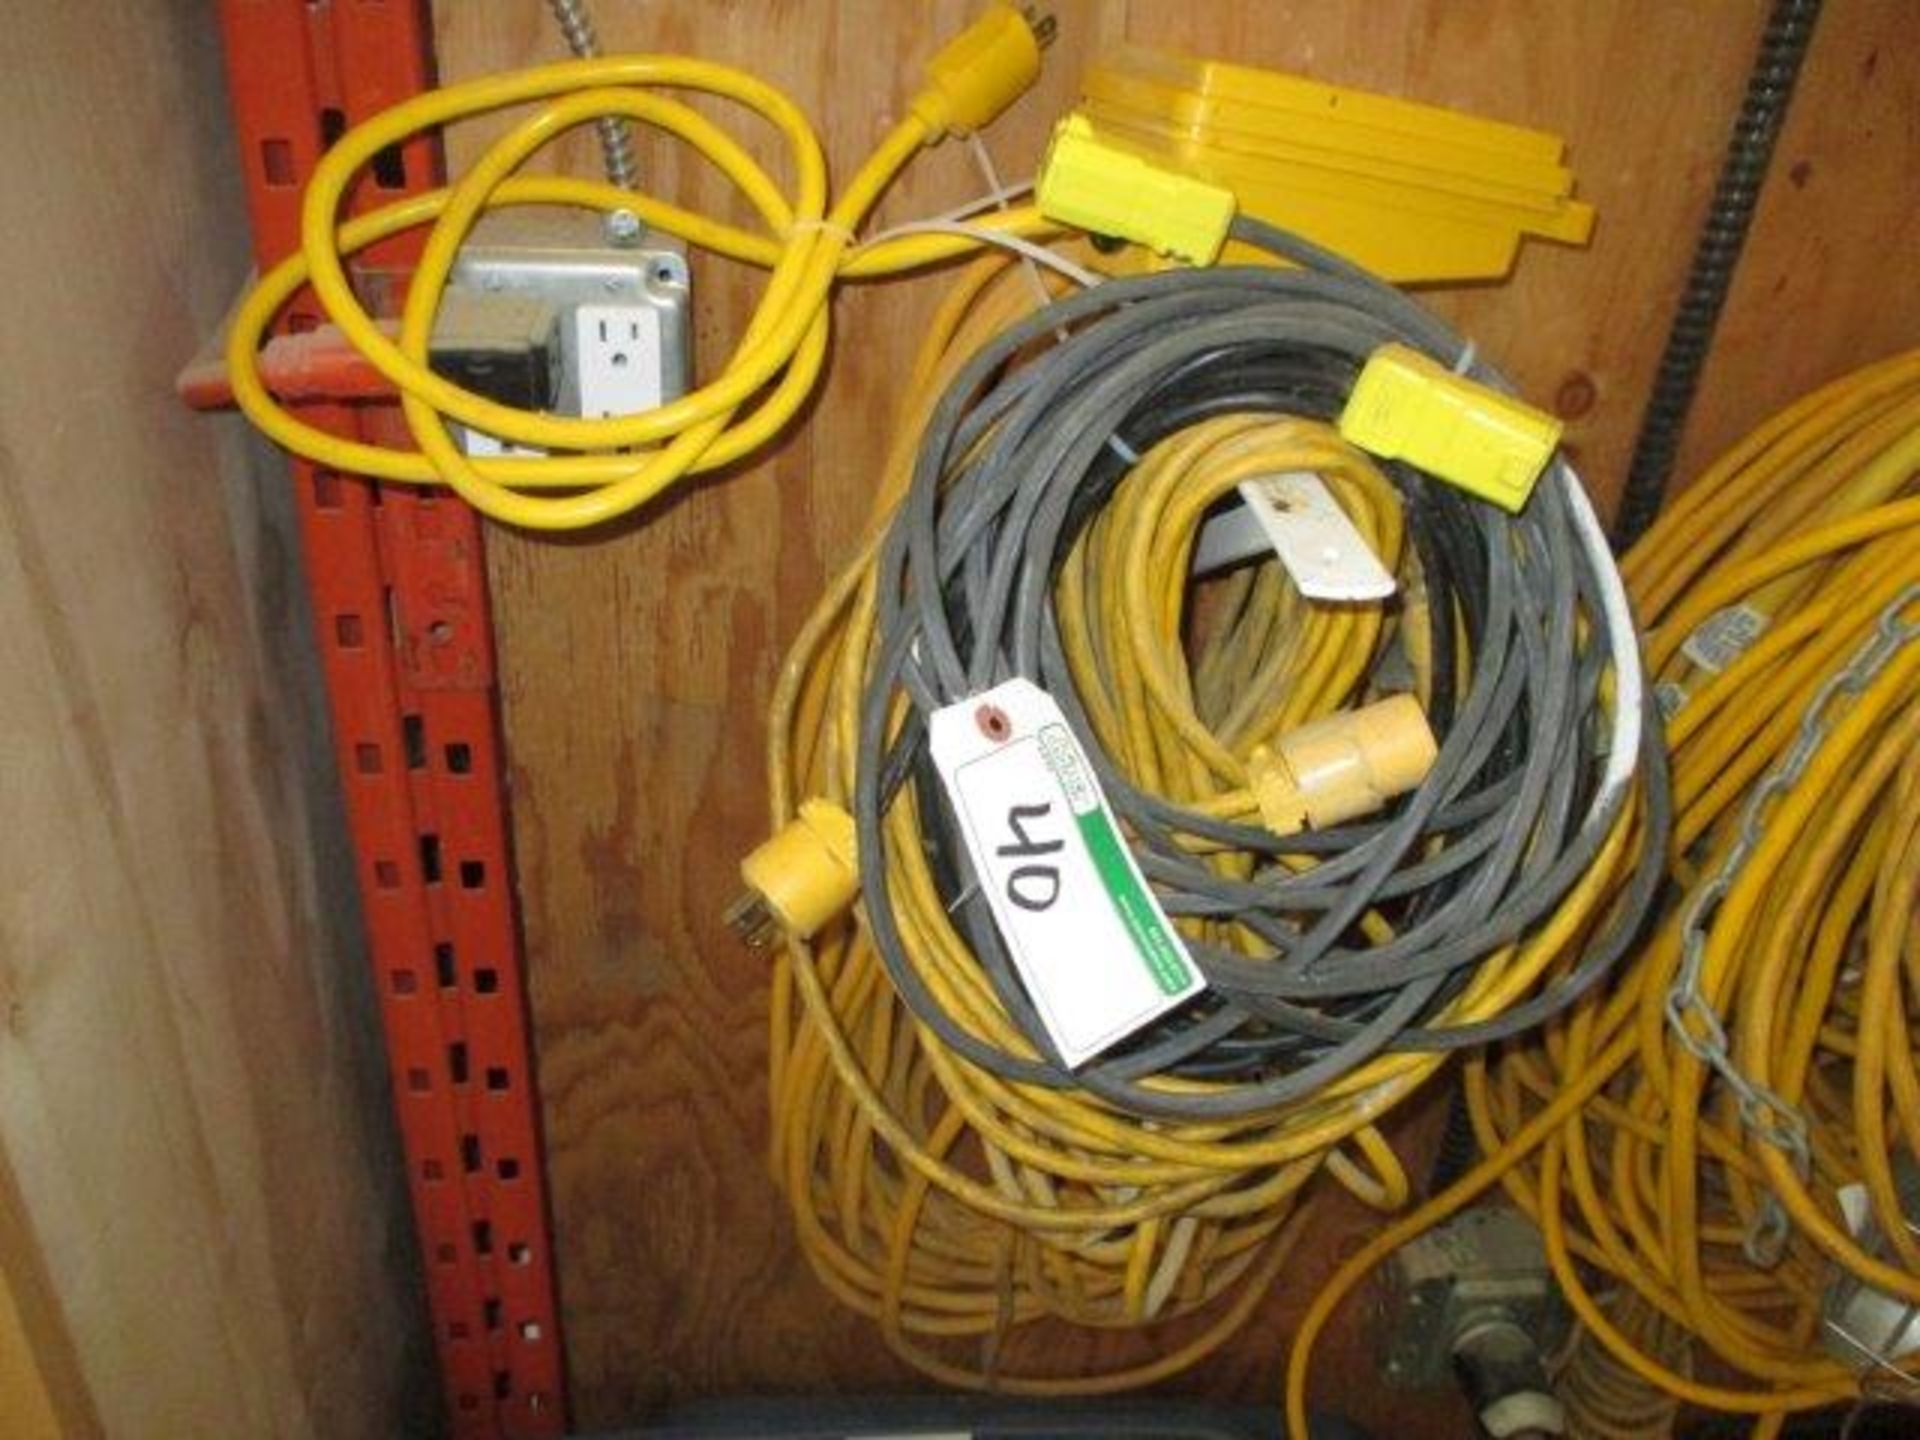 LOT OF ELECTRICAL CORDS